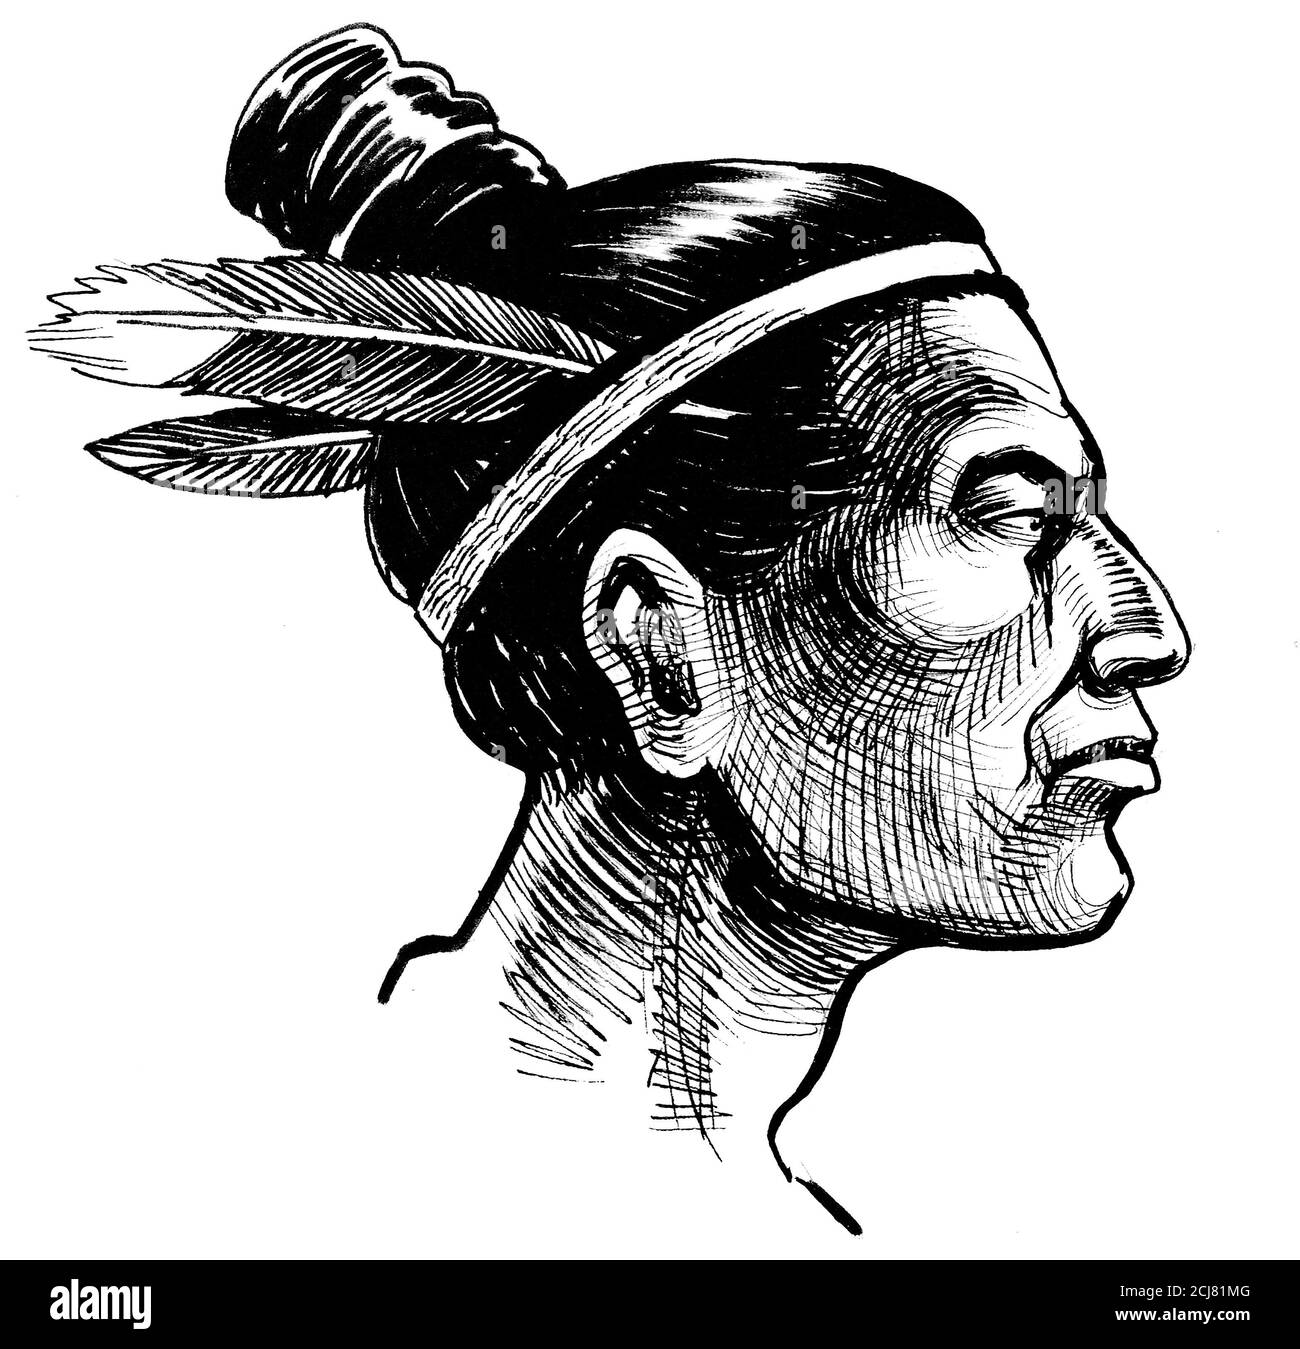 Native American head. Ink black and white drawing Stock Photo